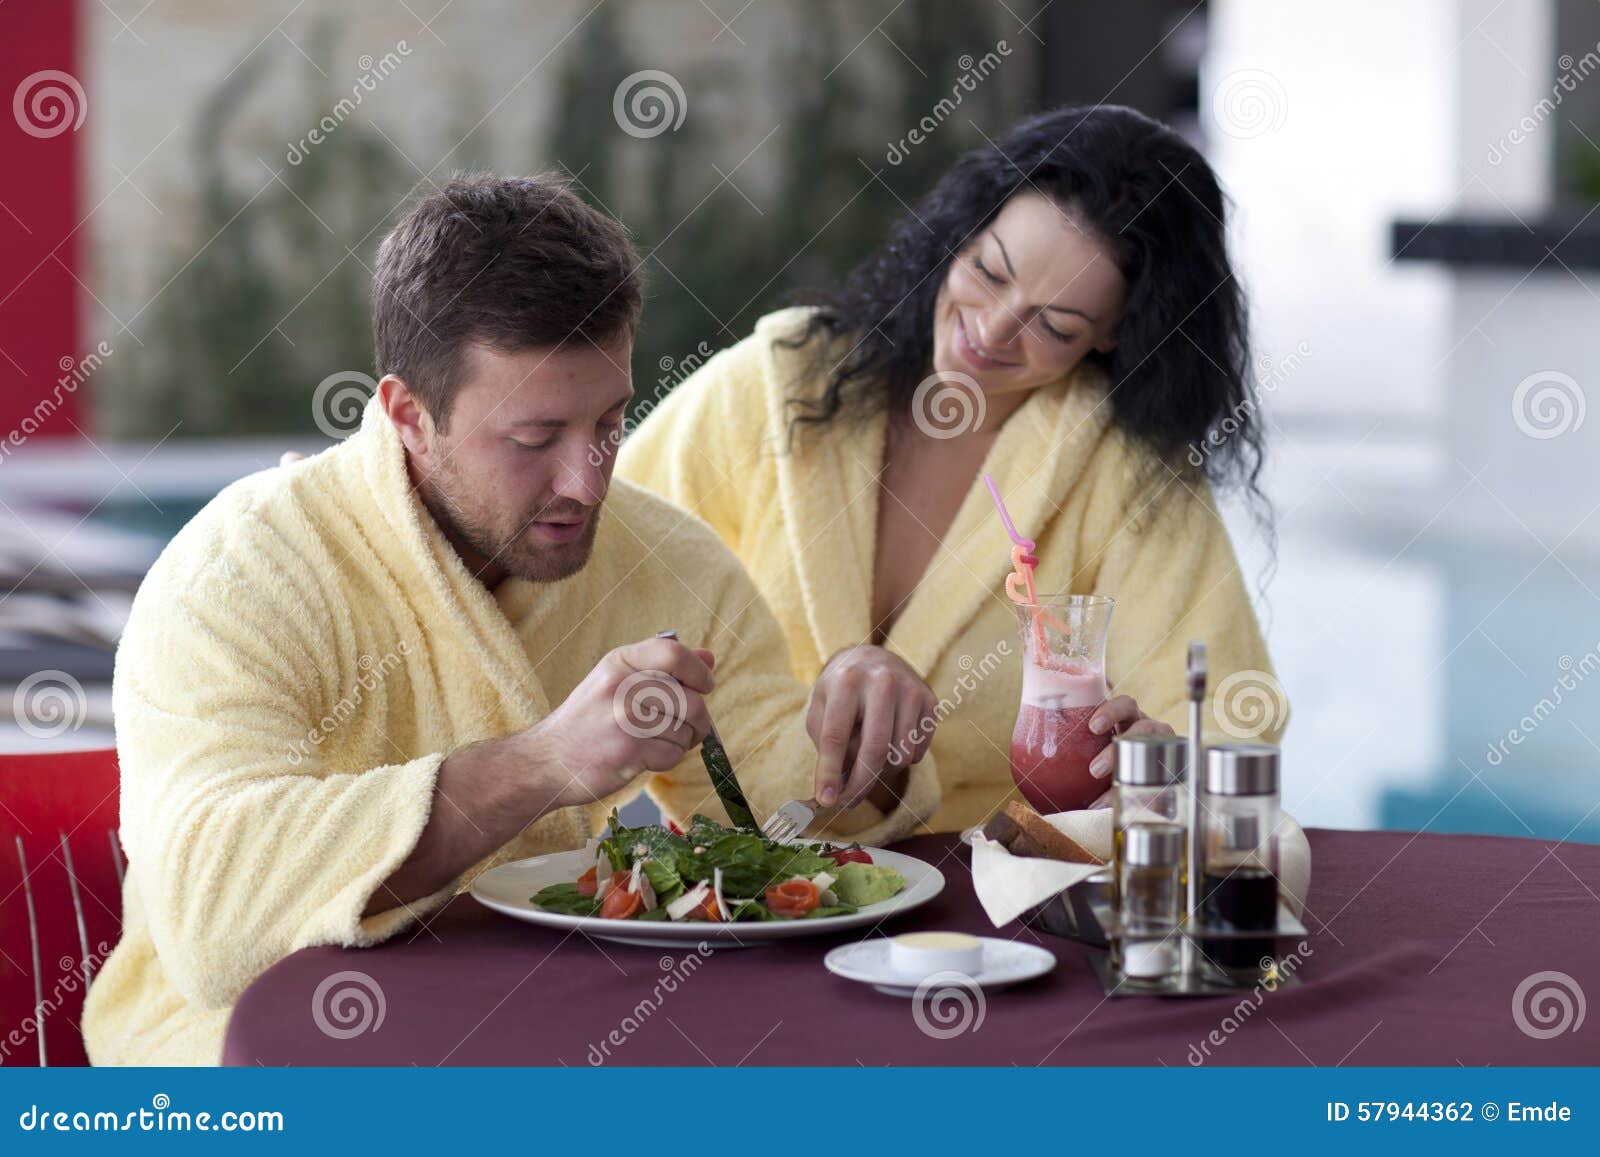 Cute Couple In Bathrobes Having Breakfast Together At